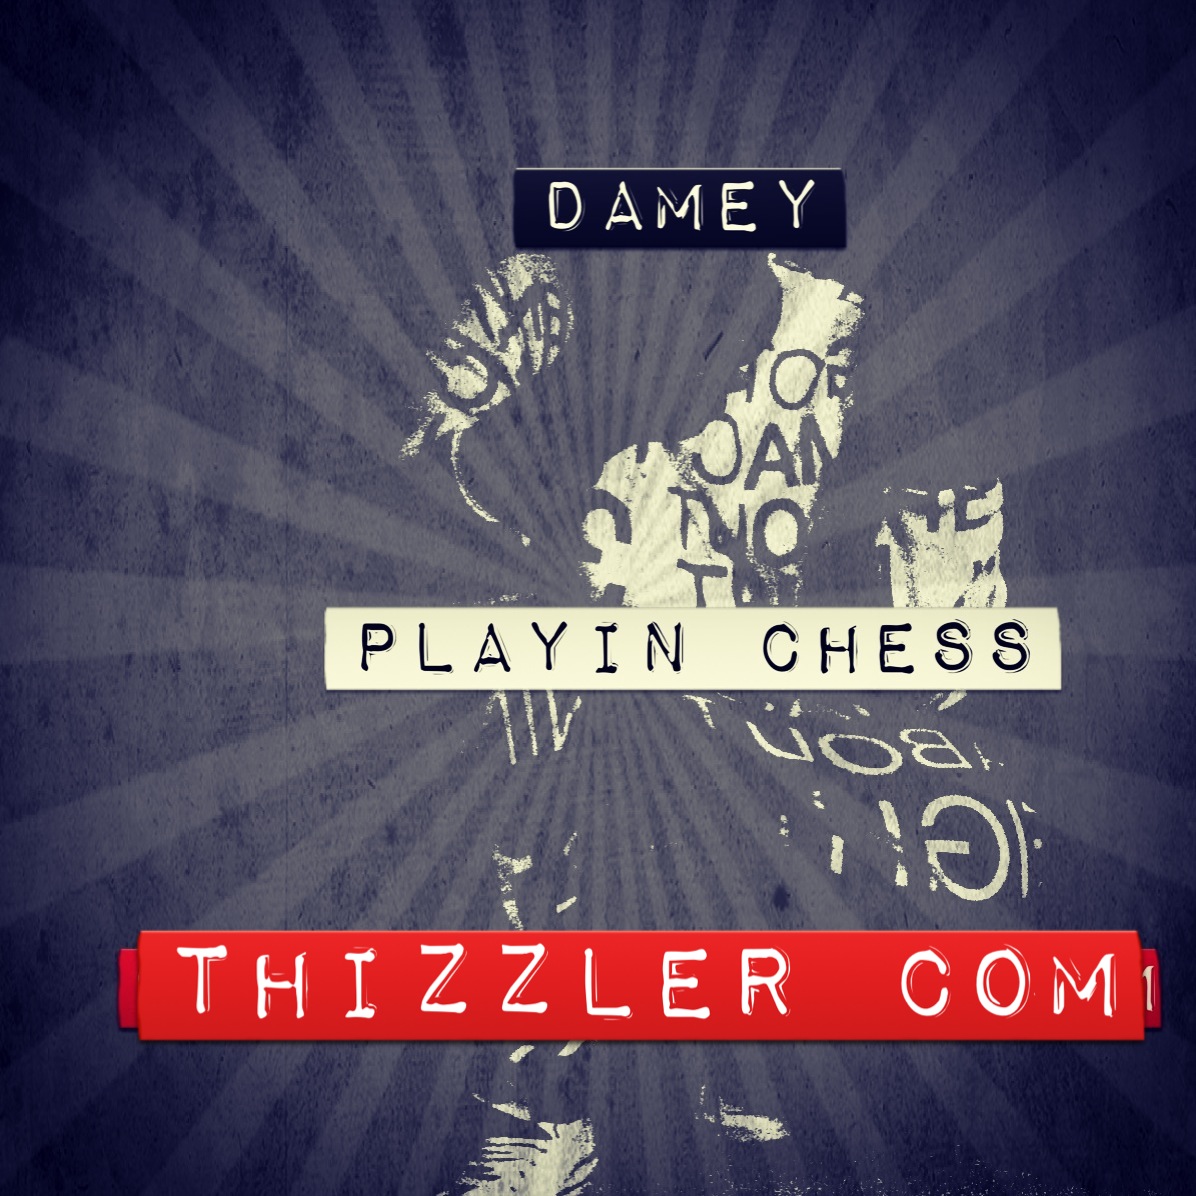 Damey - Playin Chess [Thizzler.com]